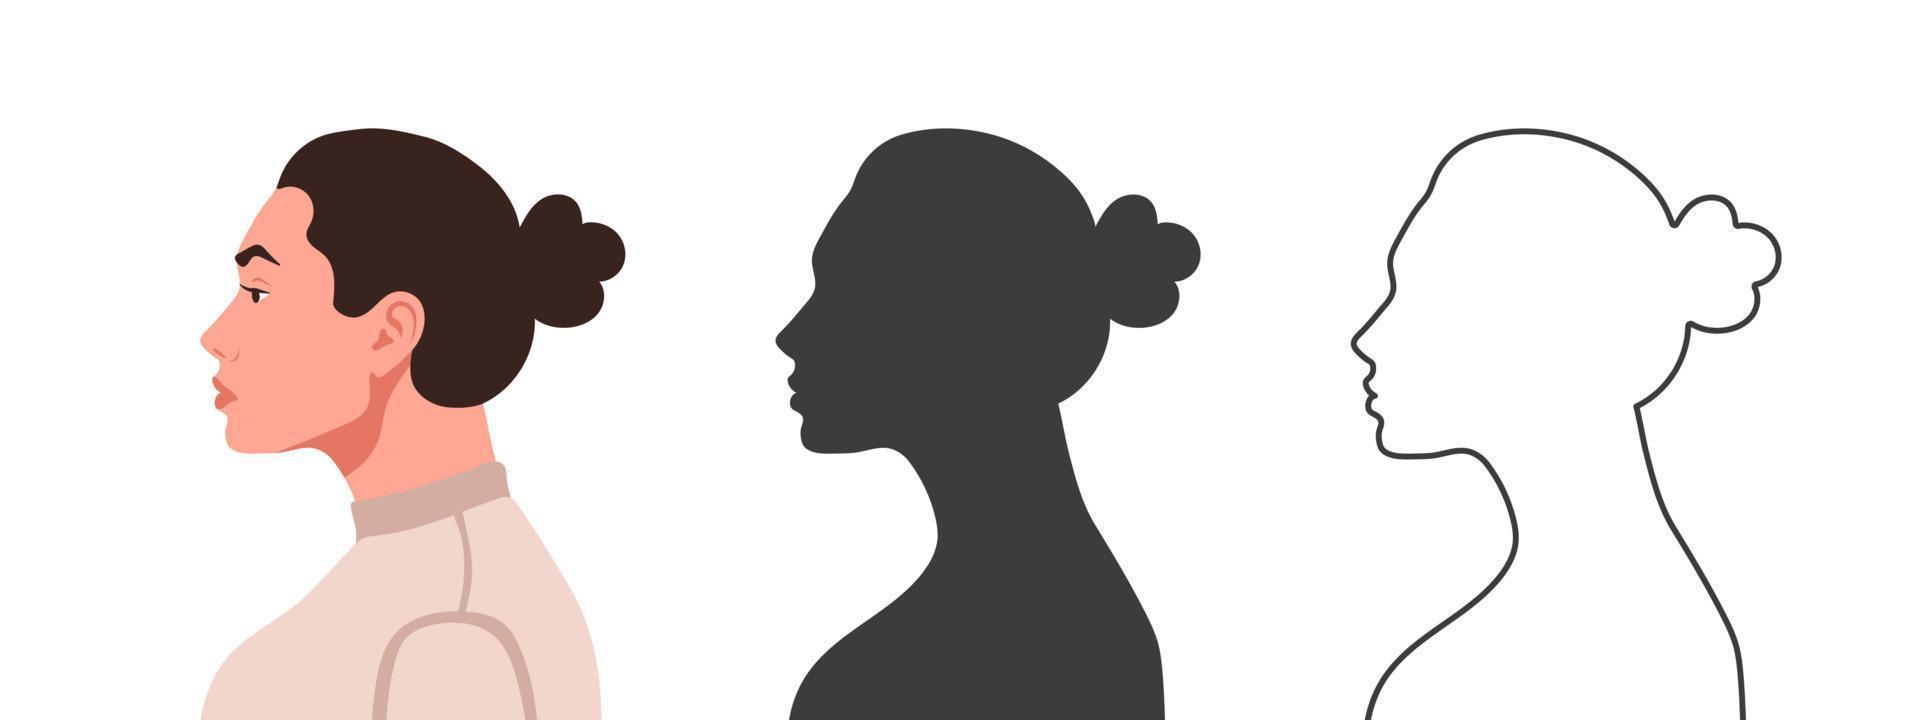 Profile of the head. Woman's face from the side. Silhouettes of people in three different styles. Face profile. Vector illustration